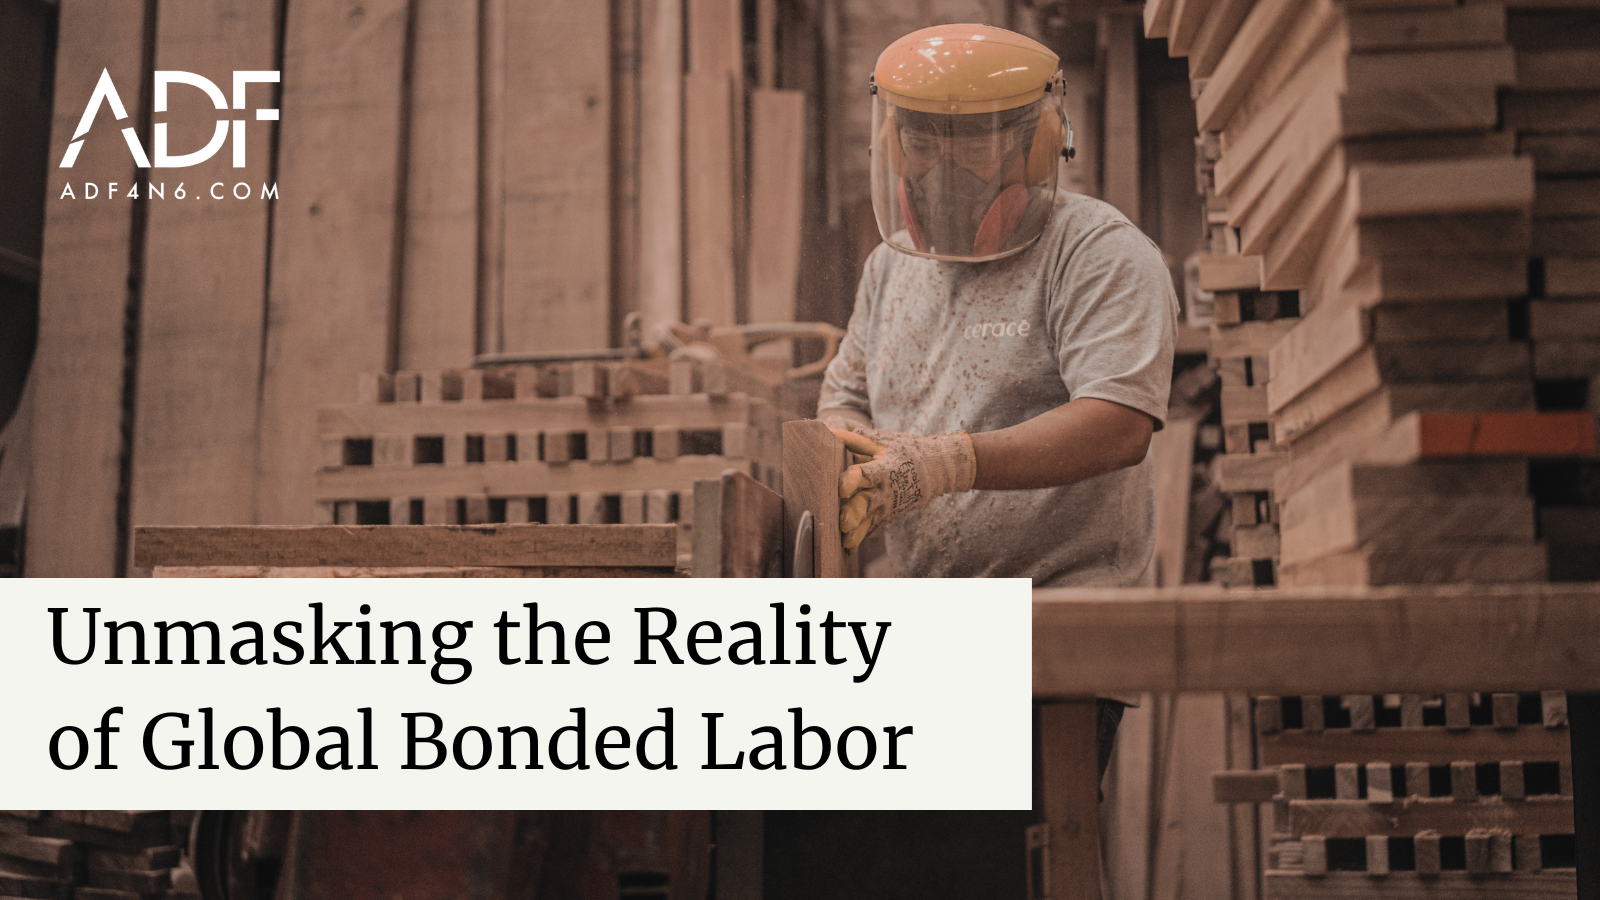 Unmasking the Reality of Global Bonded Labor